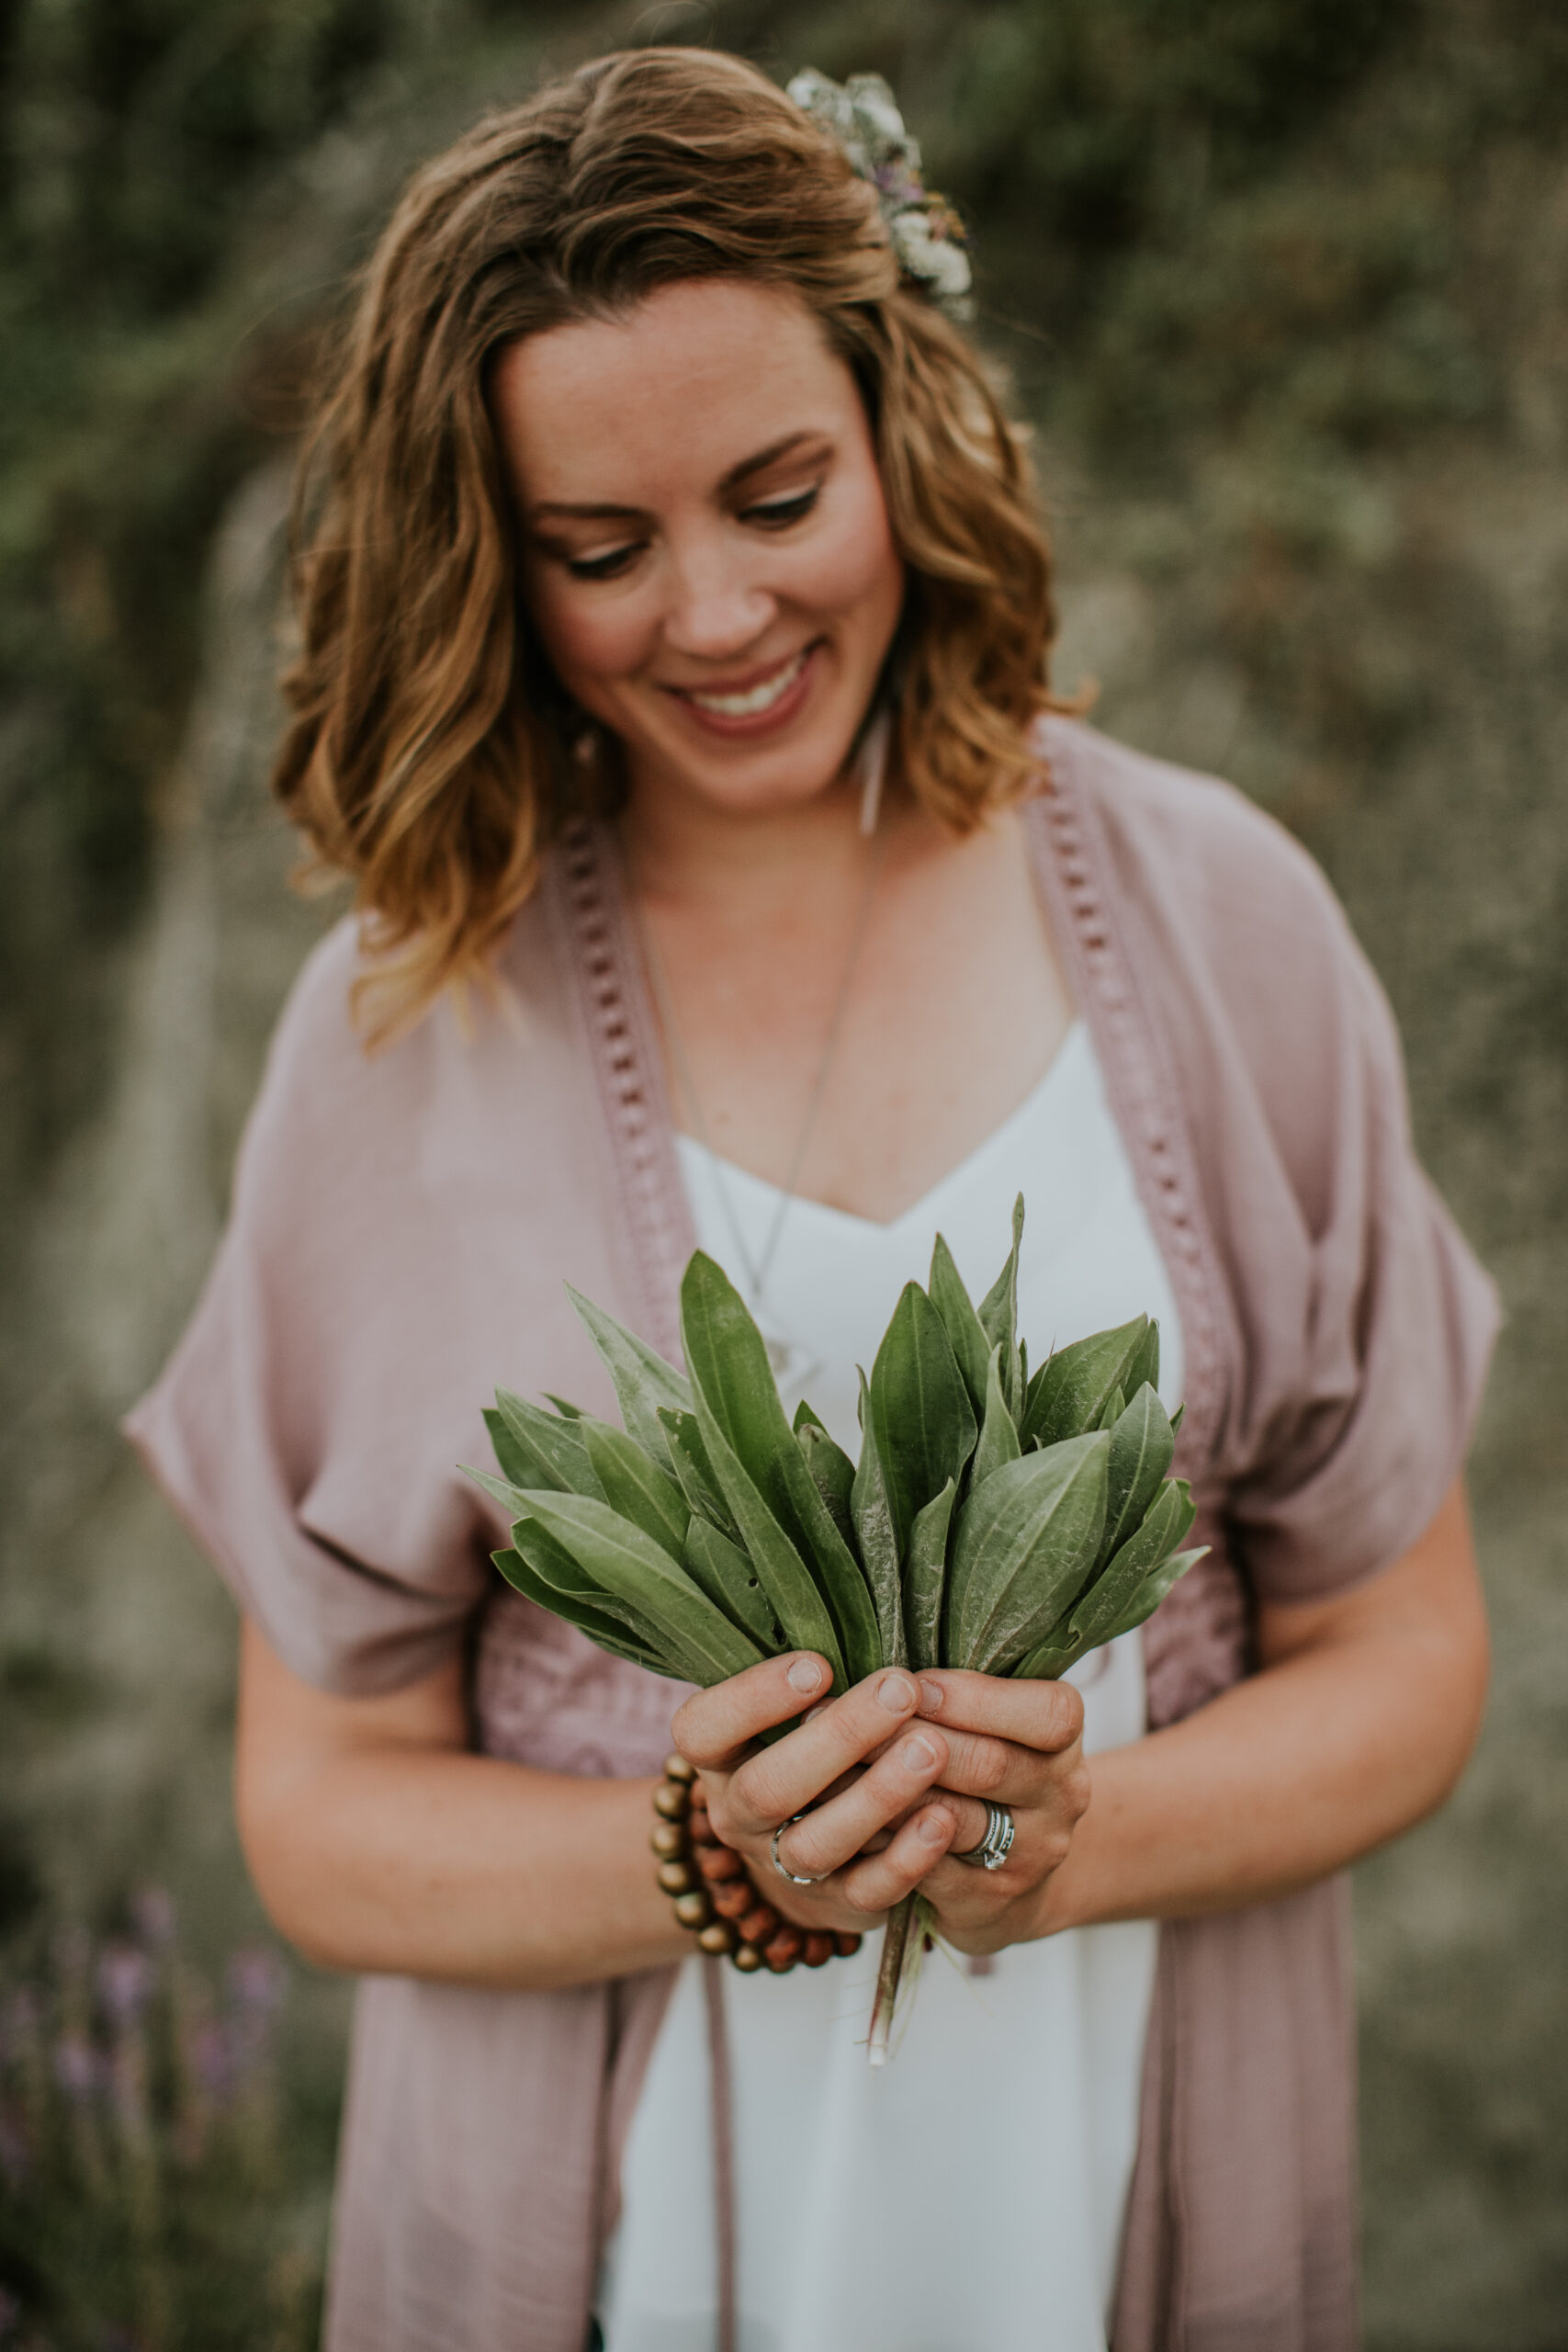 A close-up portrait-oriented image of a person holding green leaves, conveying a natural and organic feel.